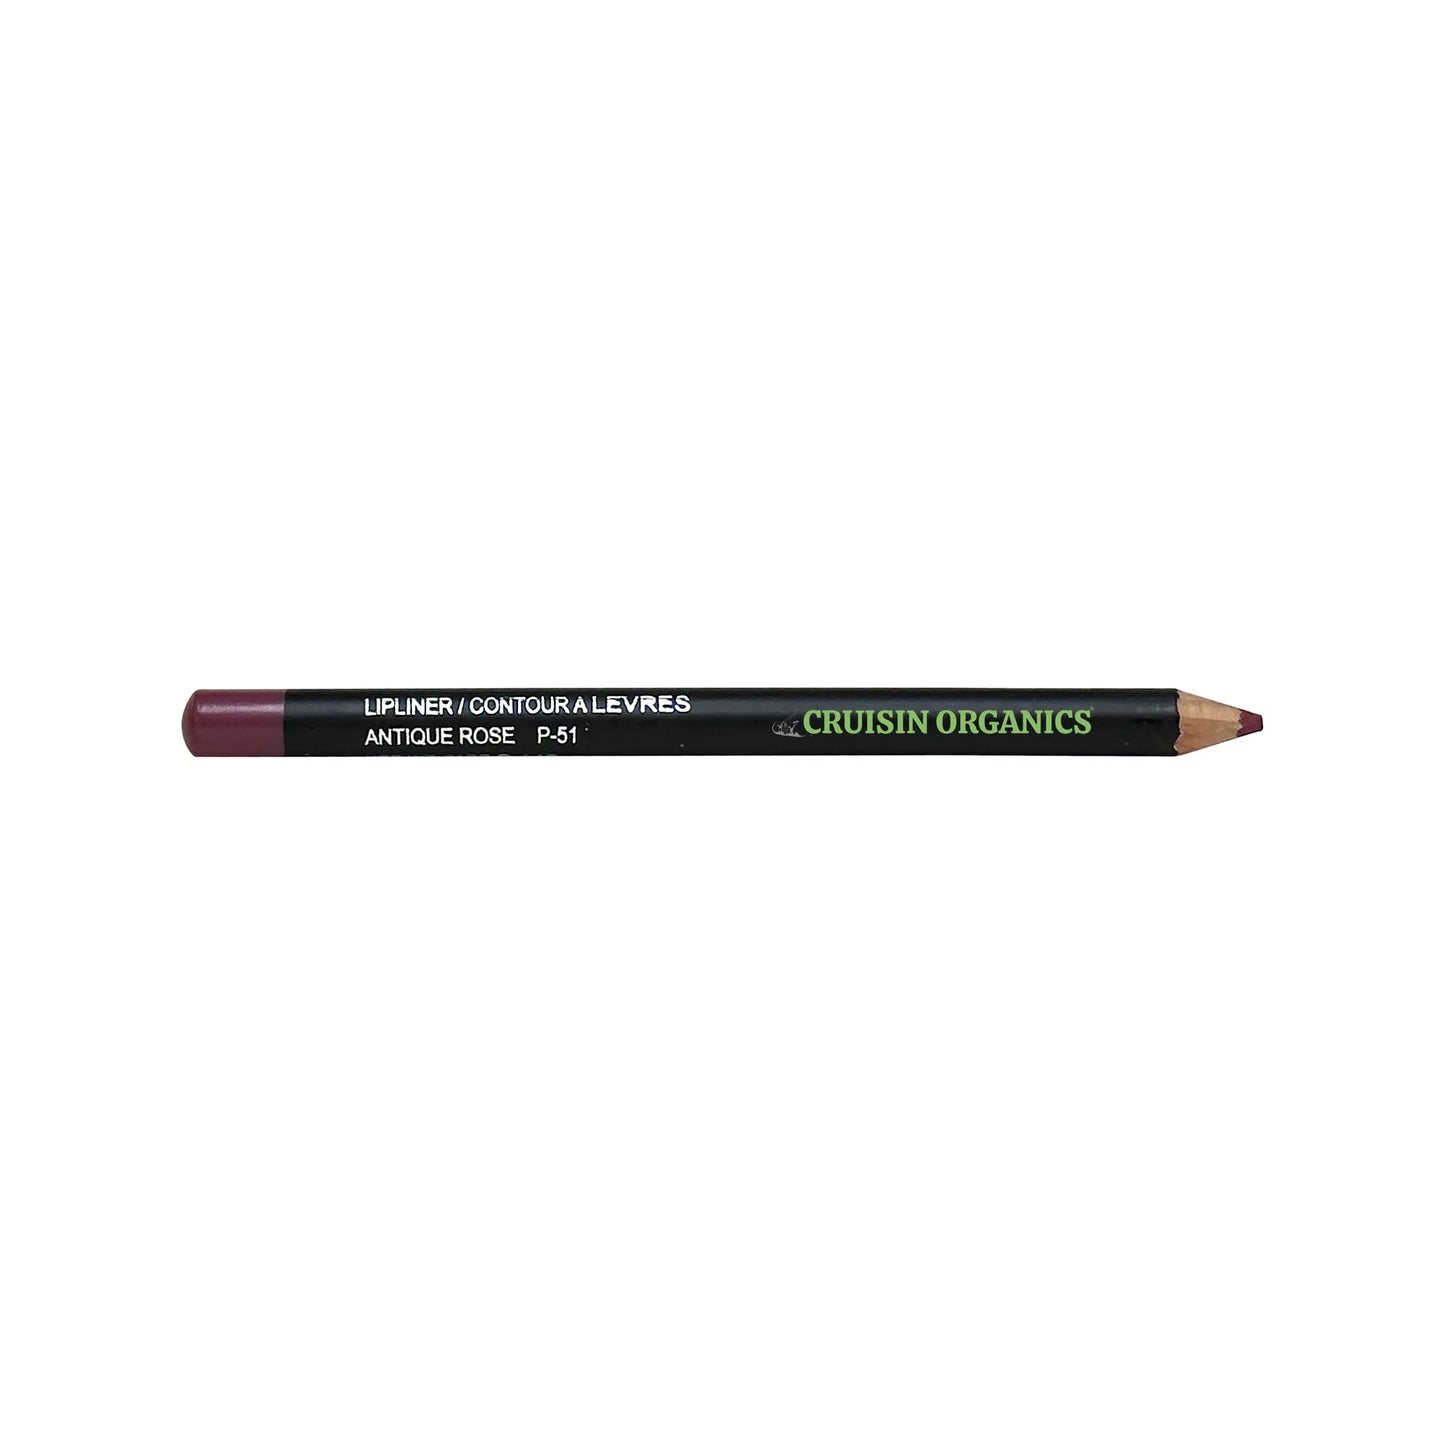 Cruisin Organics' Antique Rose Lip Liner is now available online. Made with beeswax and seed oils, this smudge-proof liner lasts for hours. Perfect for Valentine's day and beyond.